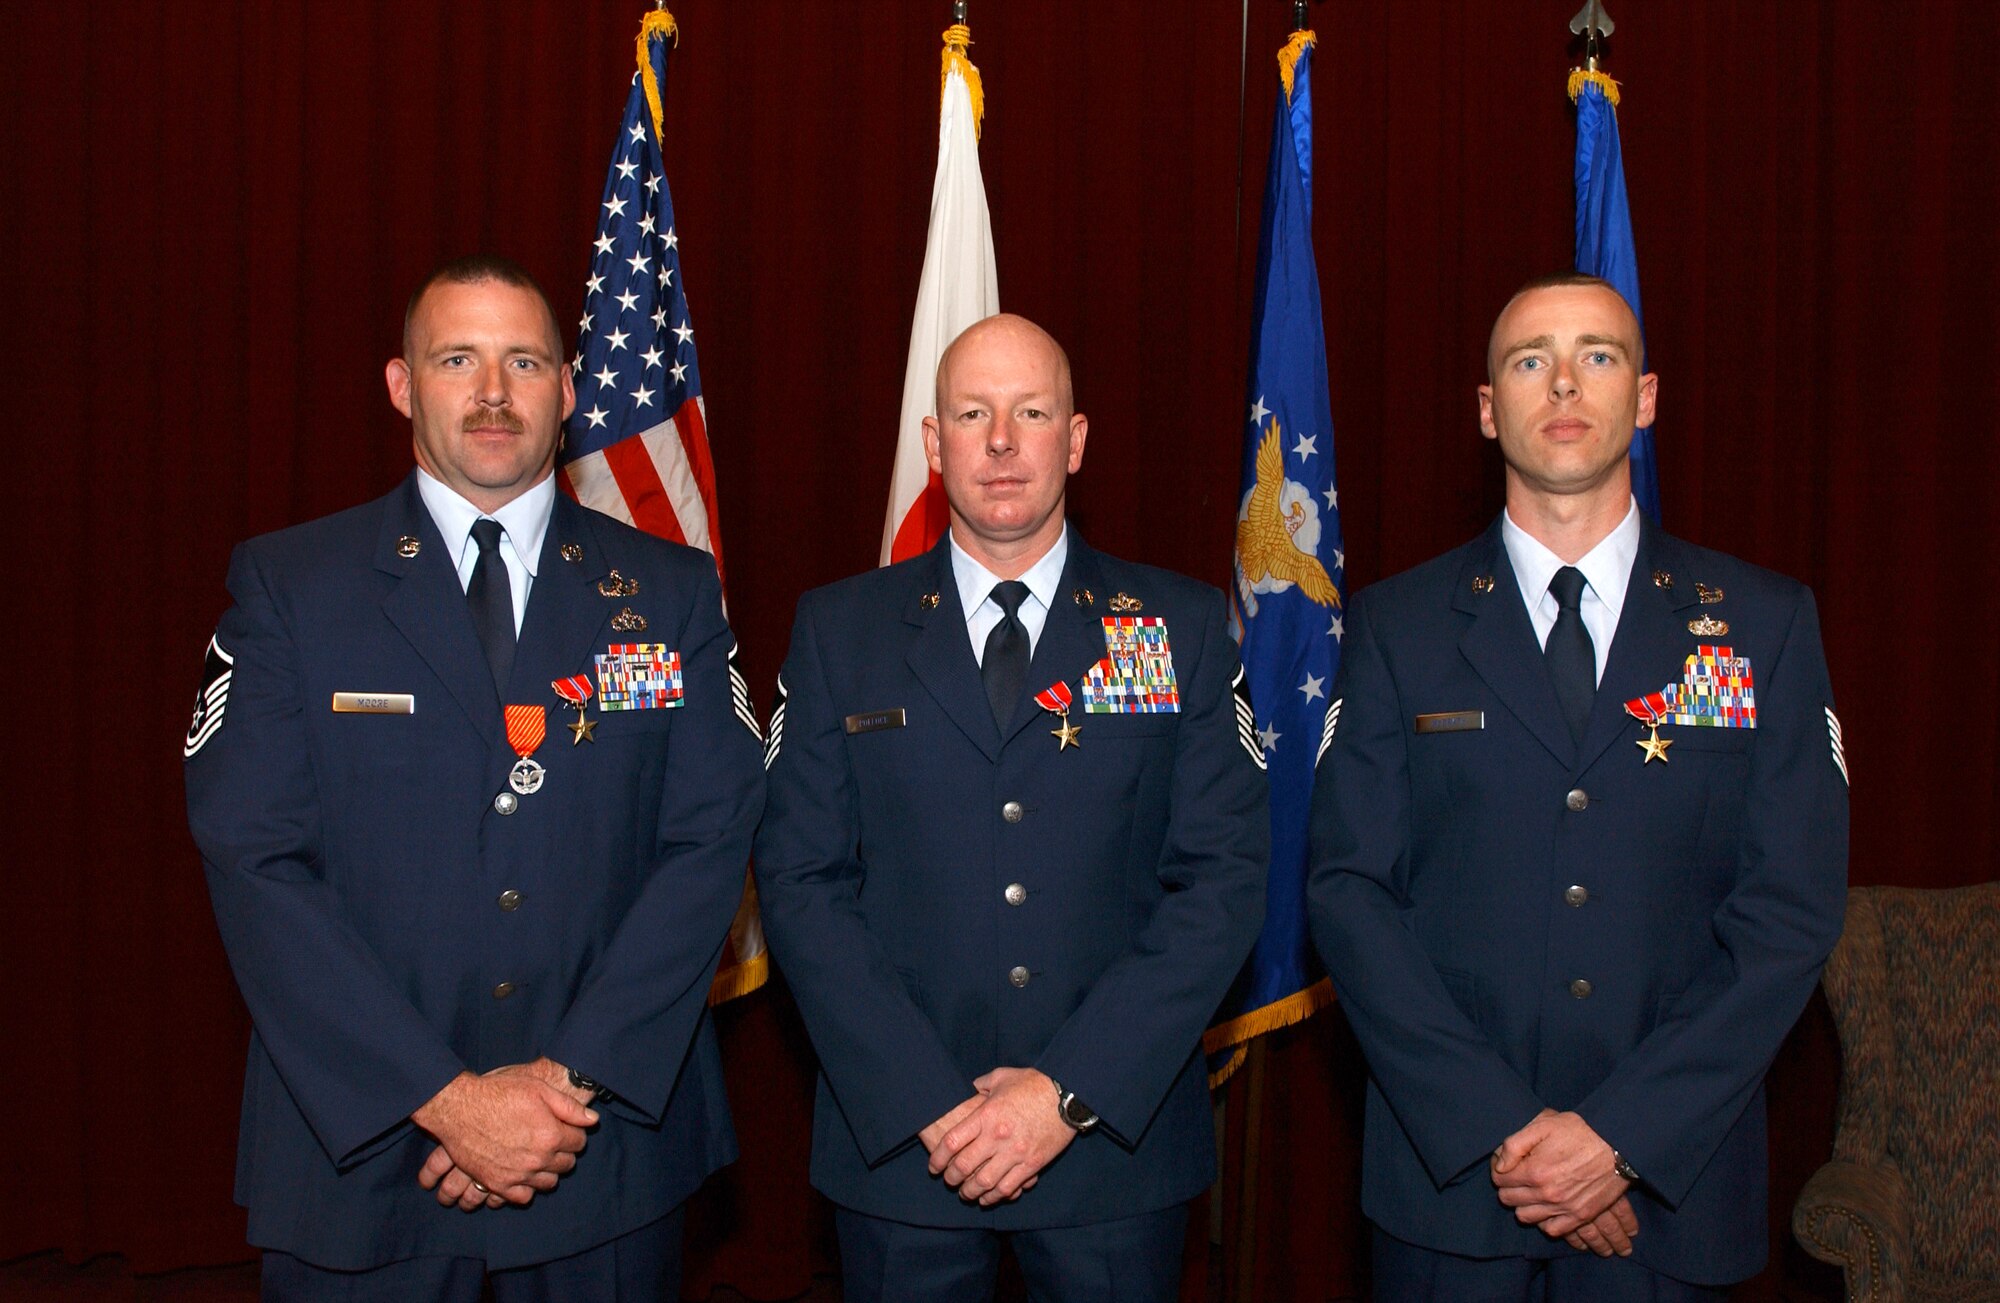 (from left) Master Sgt’s. Douglas Moore and Christopher Pollock, and Tech. Sgt. Stephen McGrath, all with the18th Civil Engineer Squadron, received the Bronze Star Medal in a ceremony at the Officers Club Feb. 27. Sergeant Moore was  also presented with the new Air Force Combat Action Medal for his actions while returning enemy fire in support of Operation Iraqi Freedom.
(U.S. Air Force photo/Senior Airman Jeremy McGuffin) 